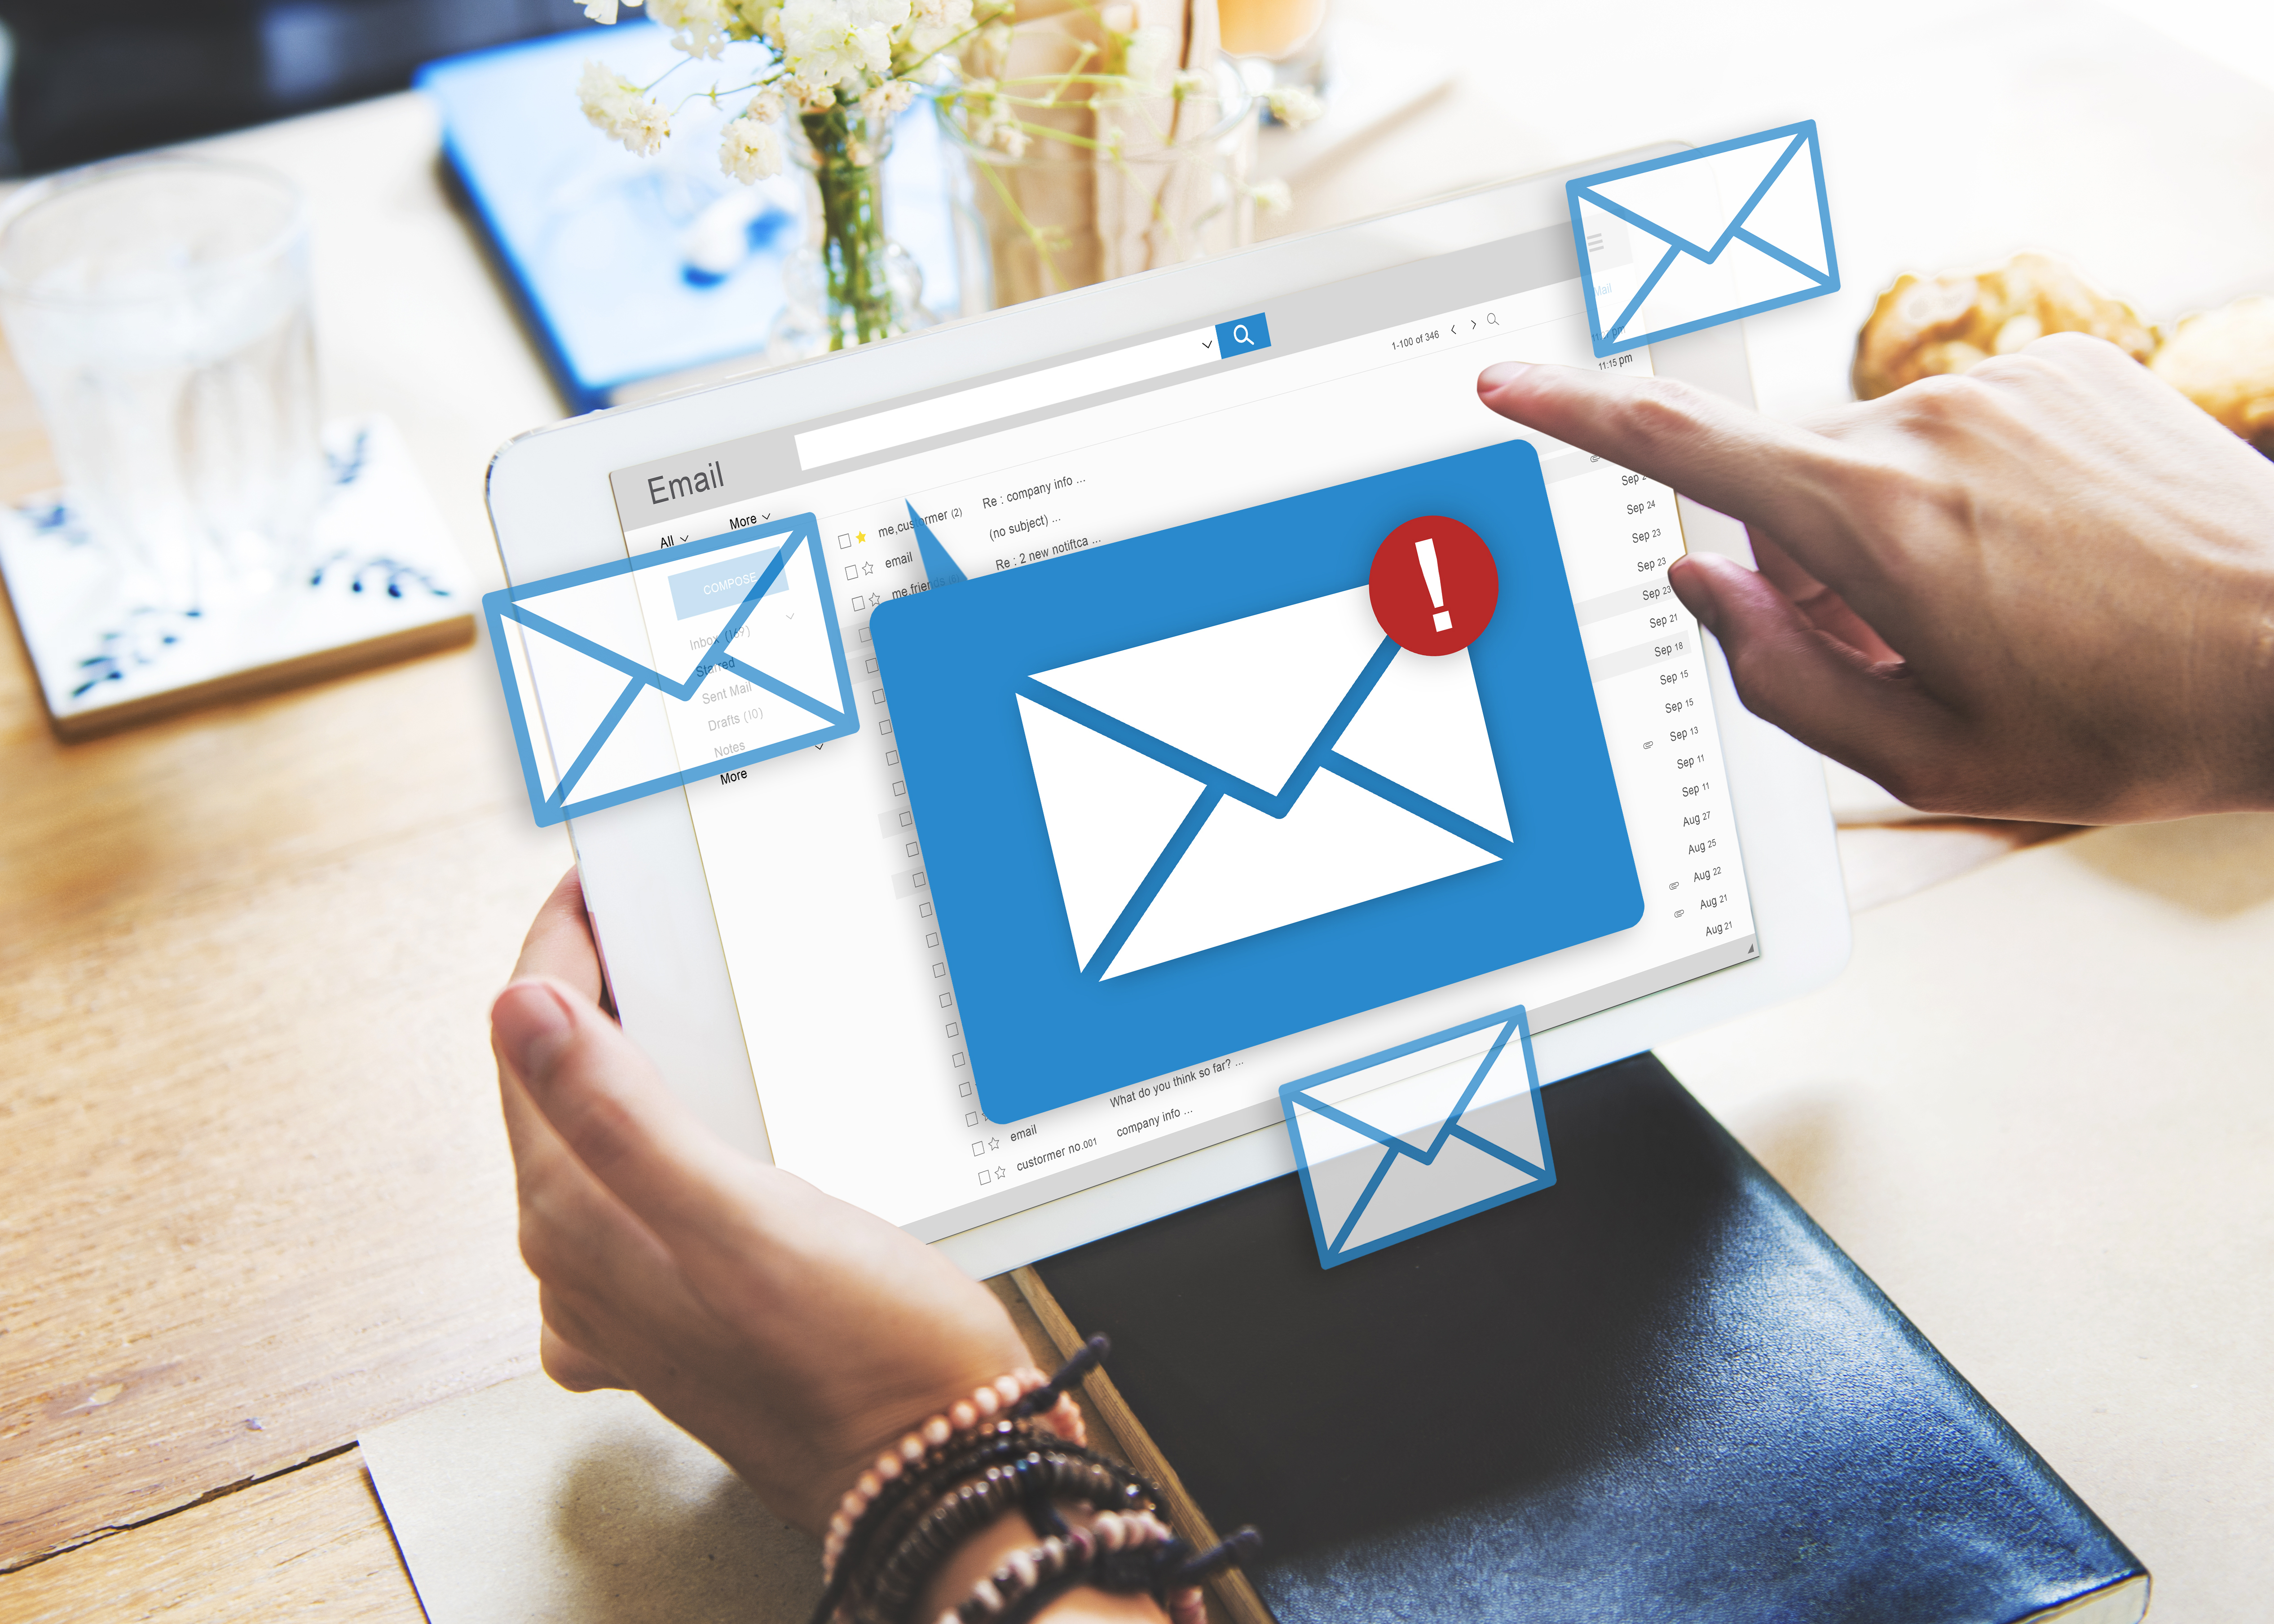 email marketing guide, email marketing tips and tricks, email marketing